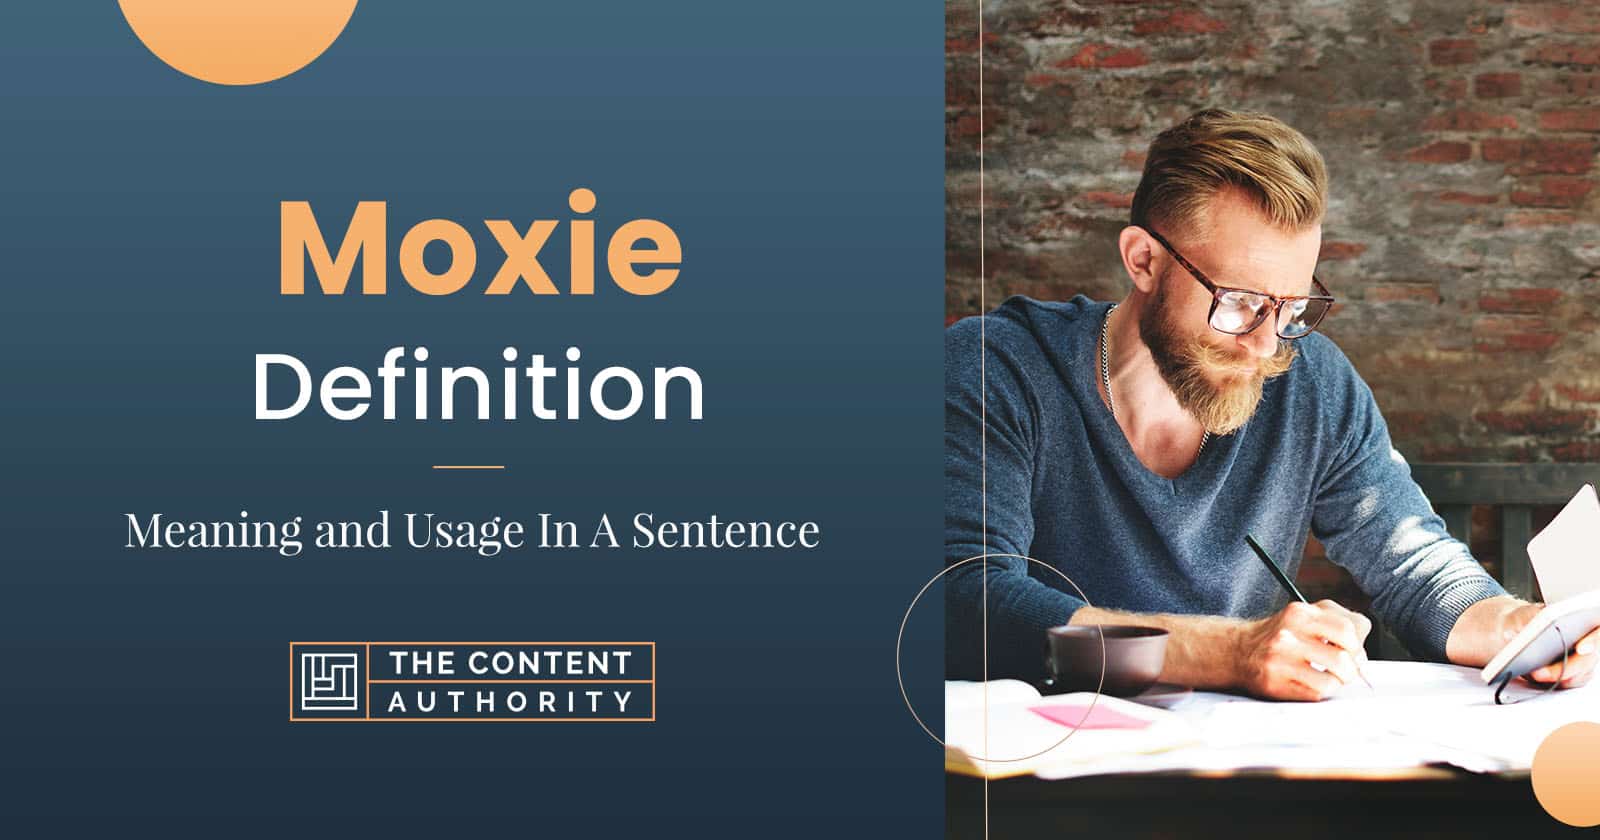 Moxie Definition – Meaning and Usage in a Sentence